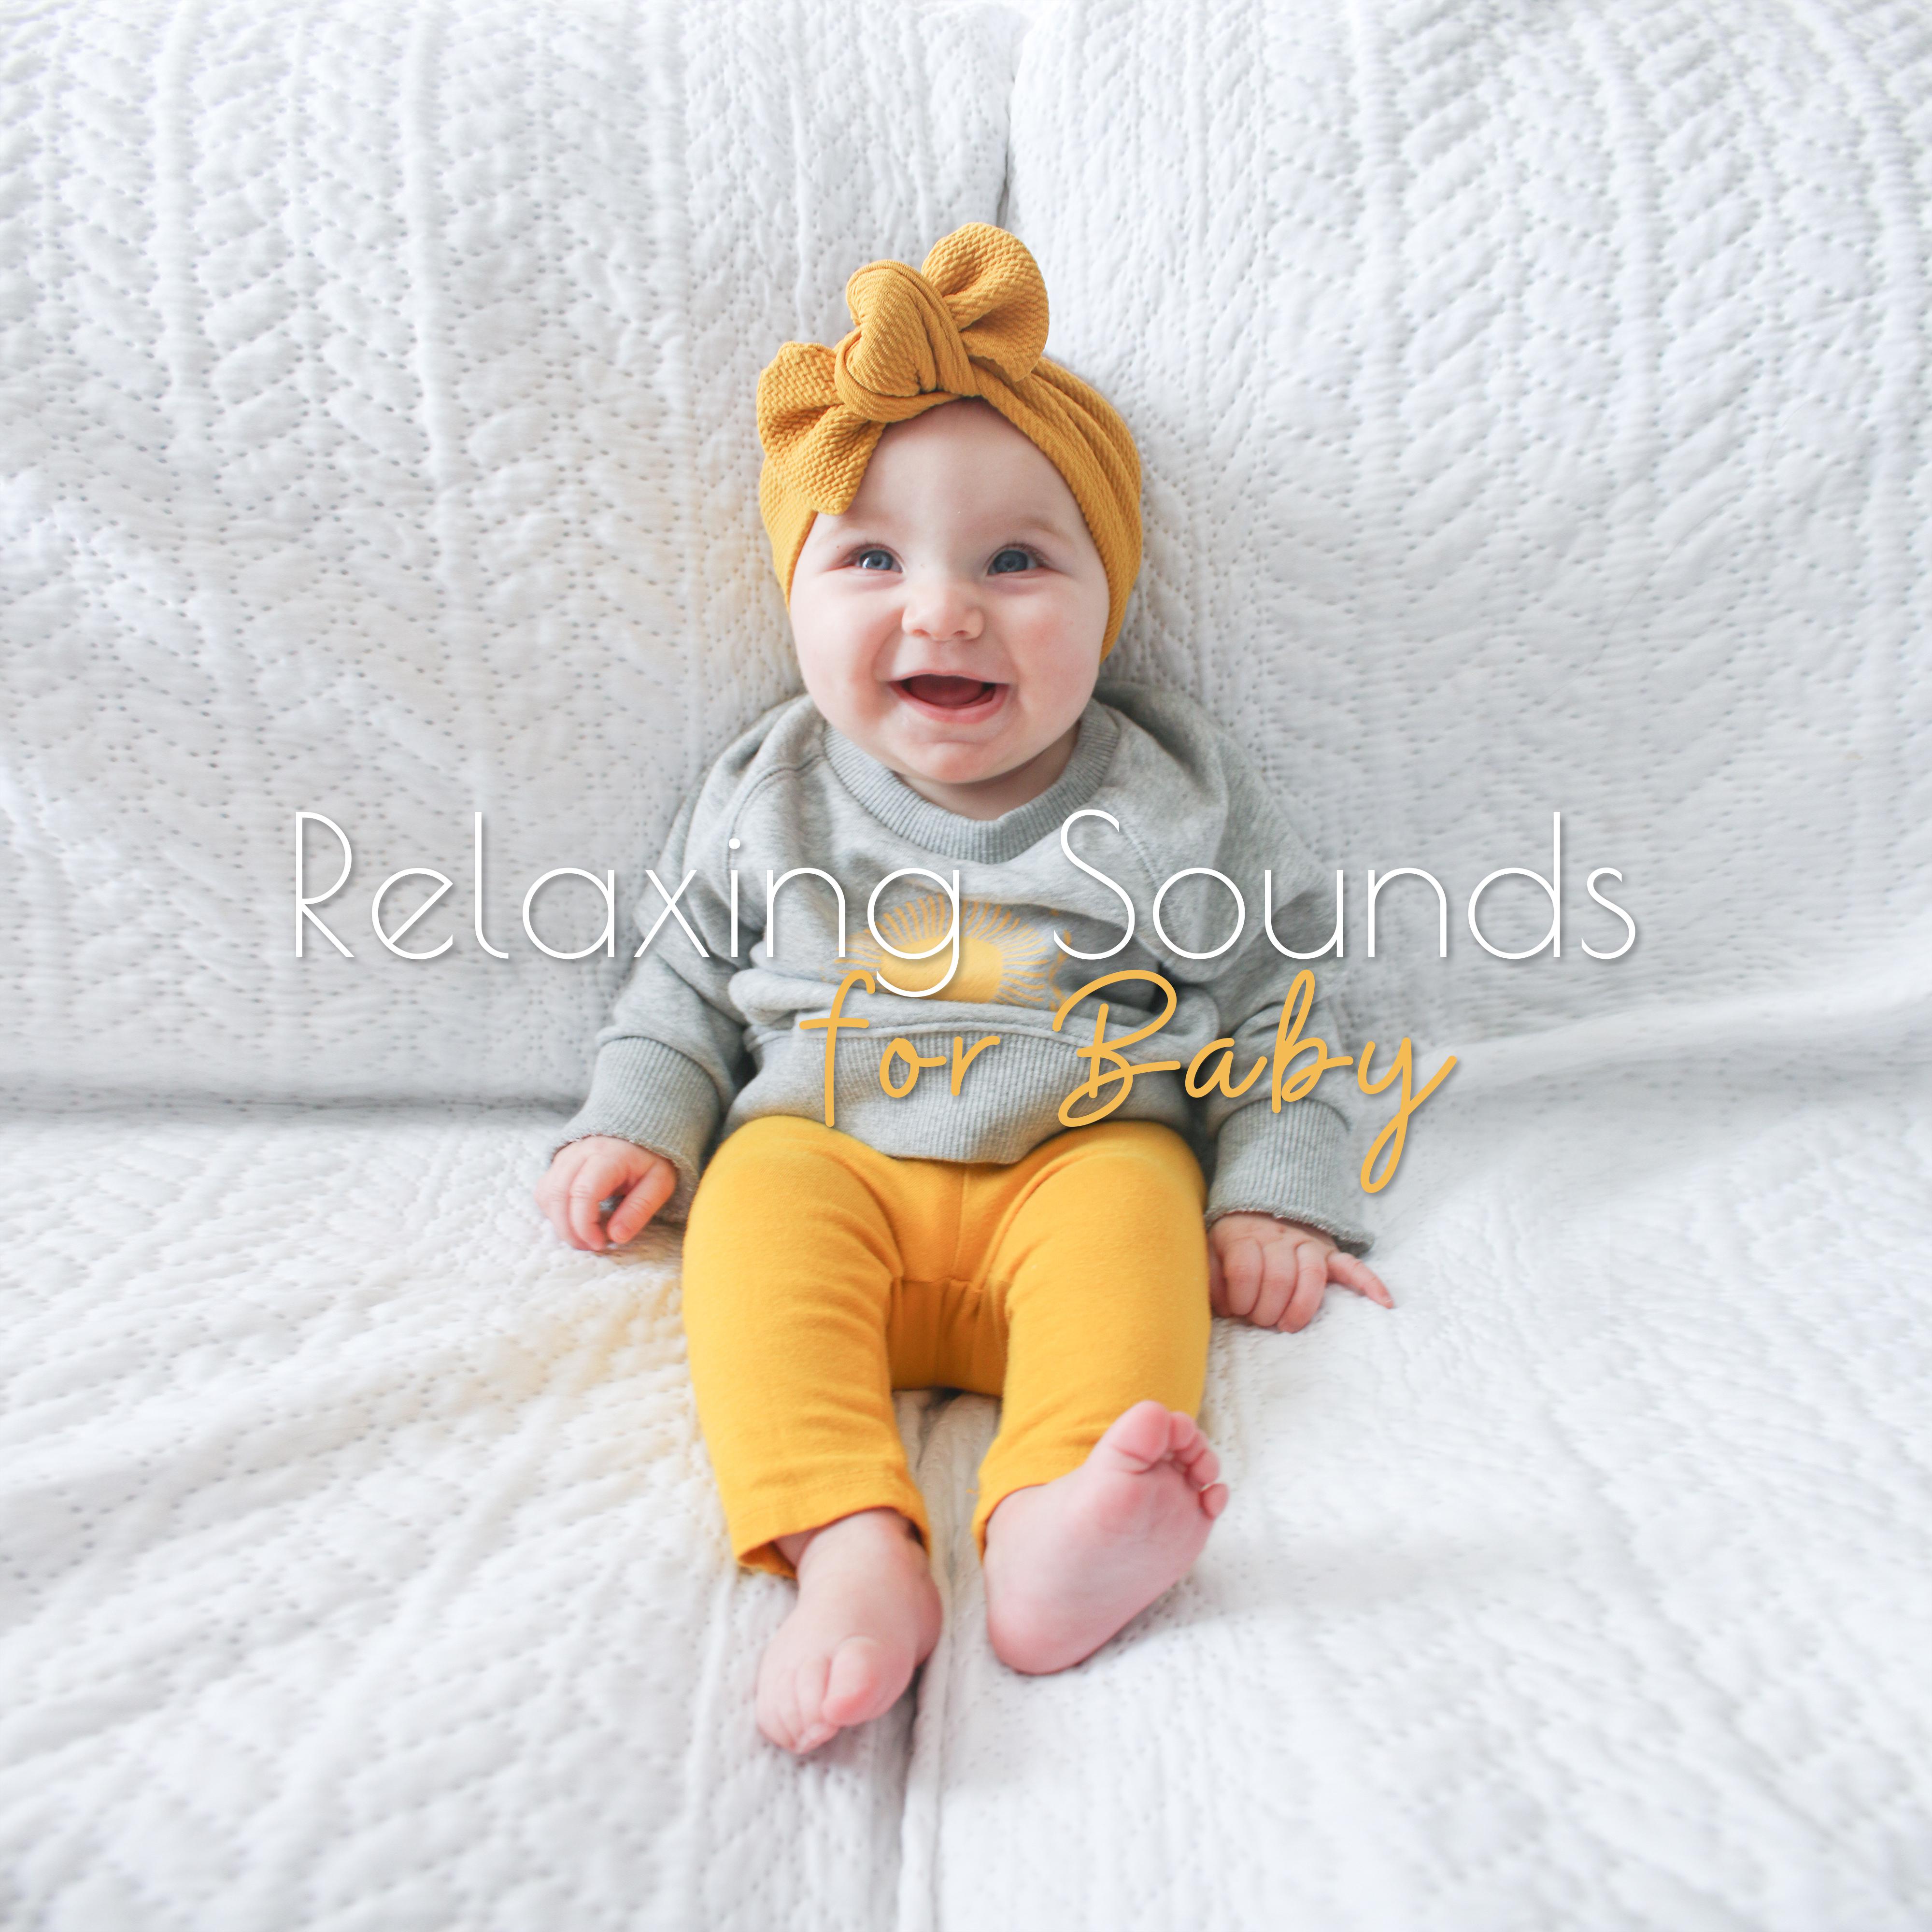 Relaxing Sounds for Baby: Bedtime Baby, Calming Lullabies, Deep Relax, Sweet Music, Soothing Slumber